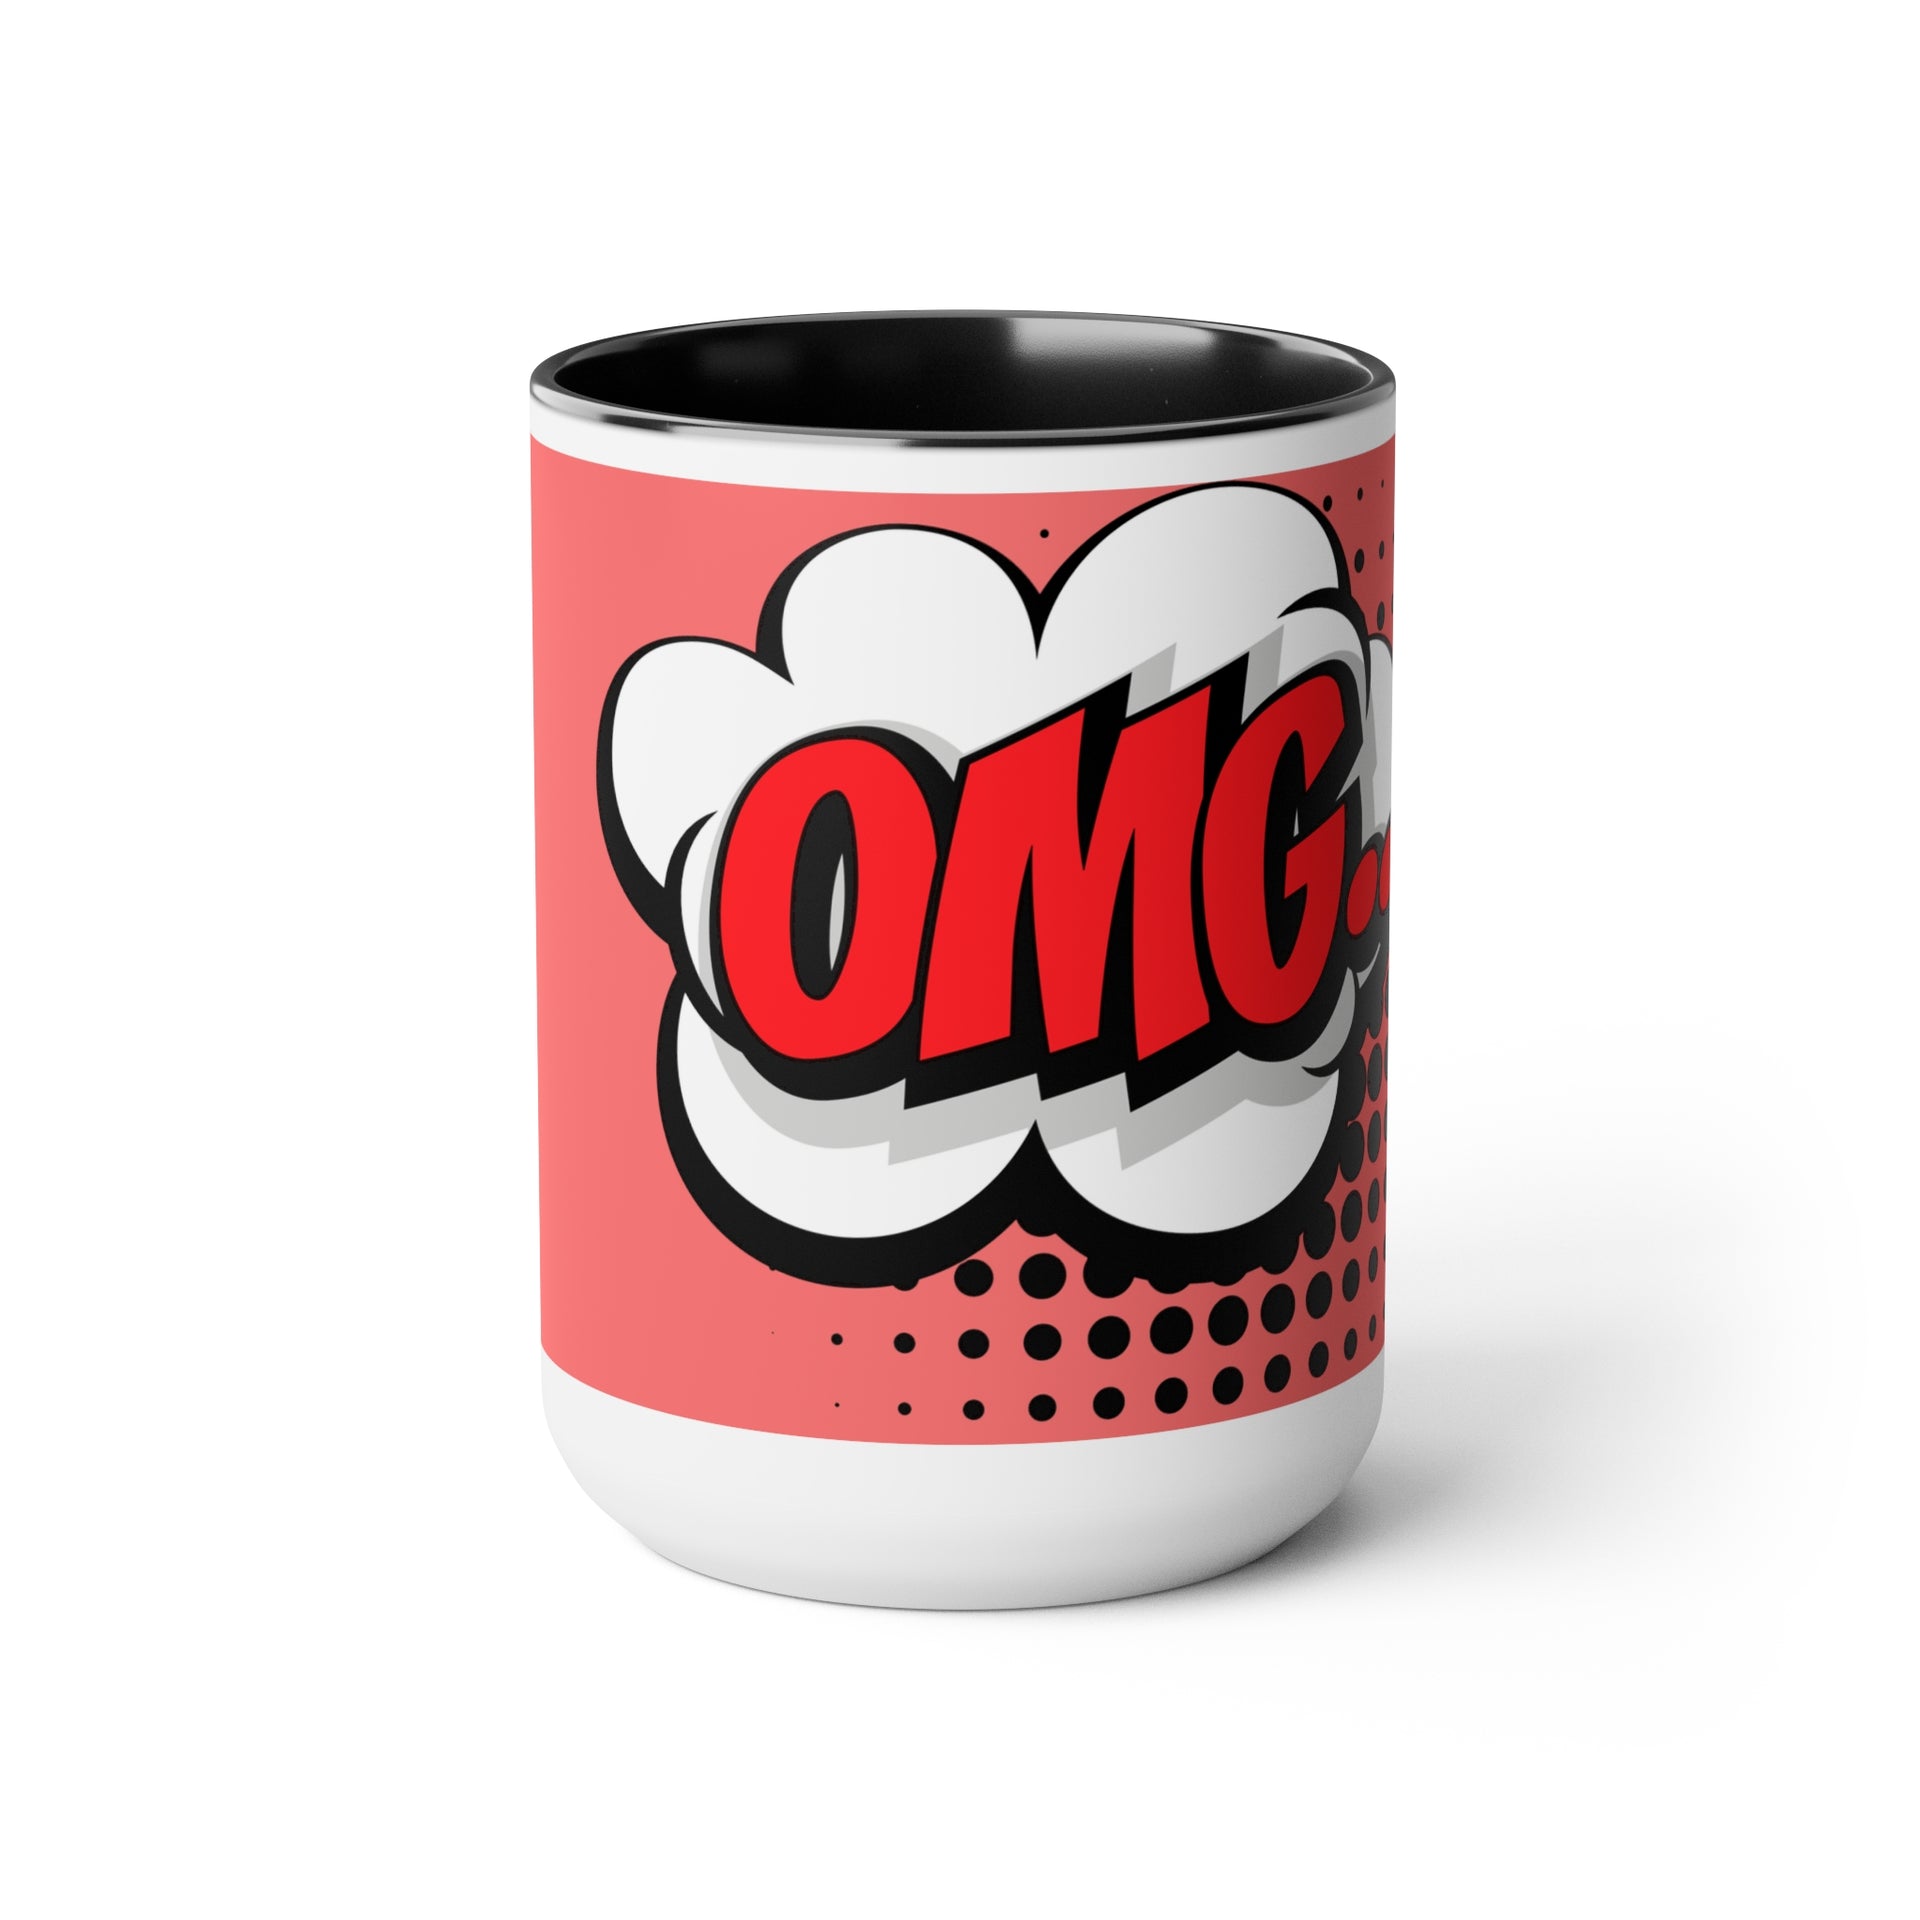 OMG Cup